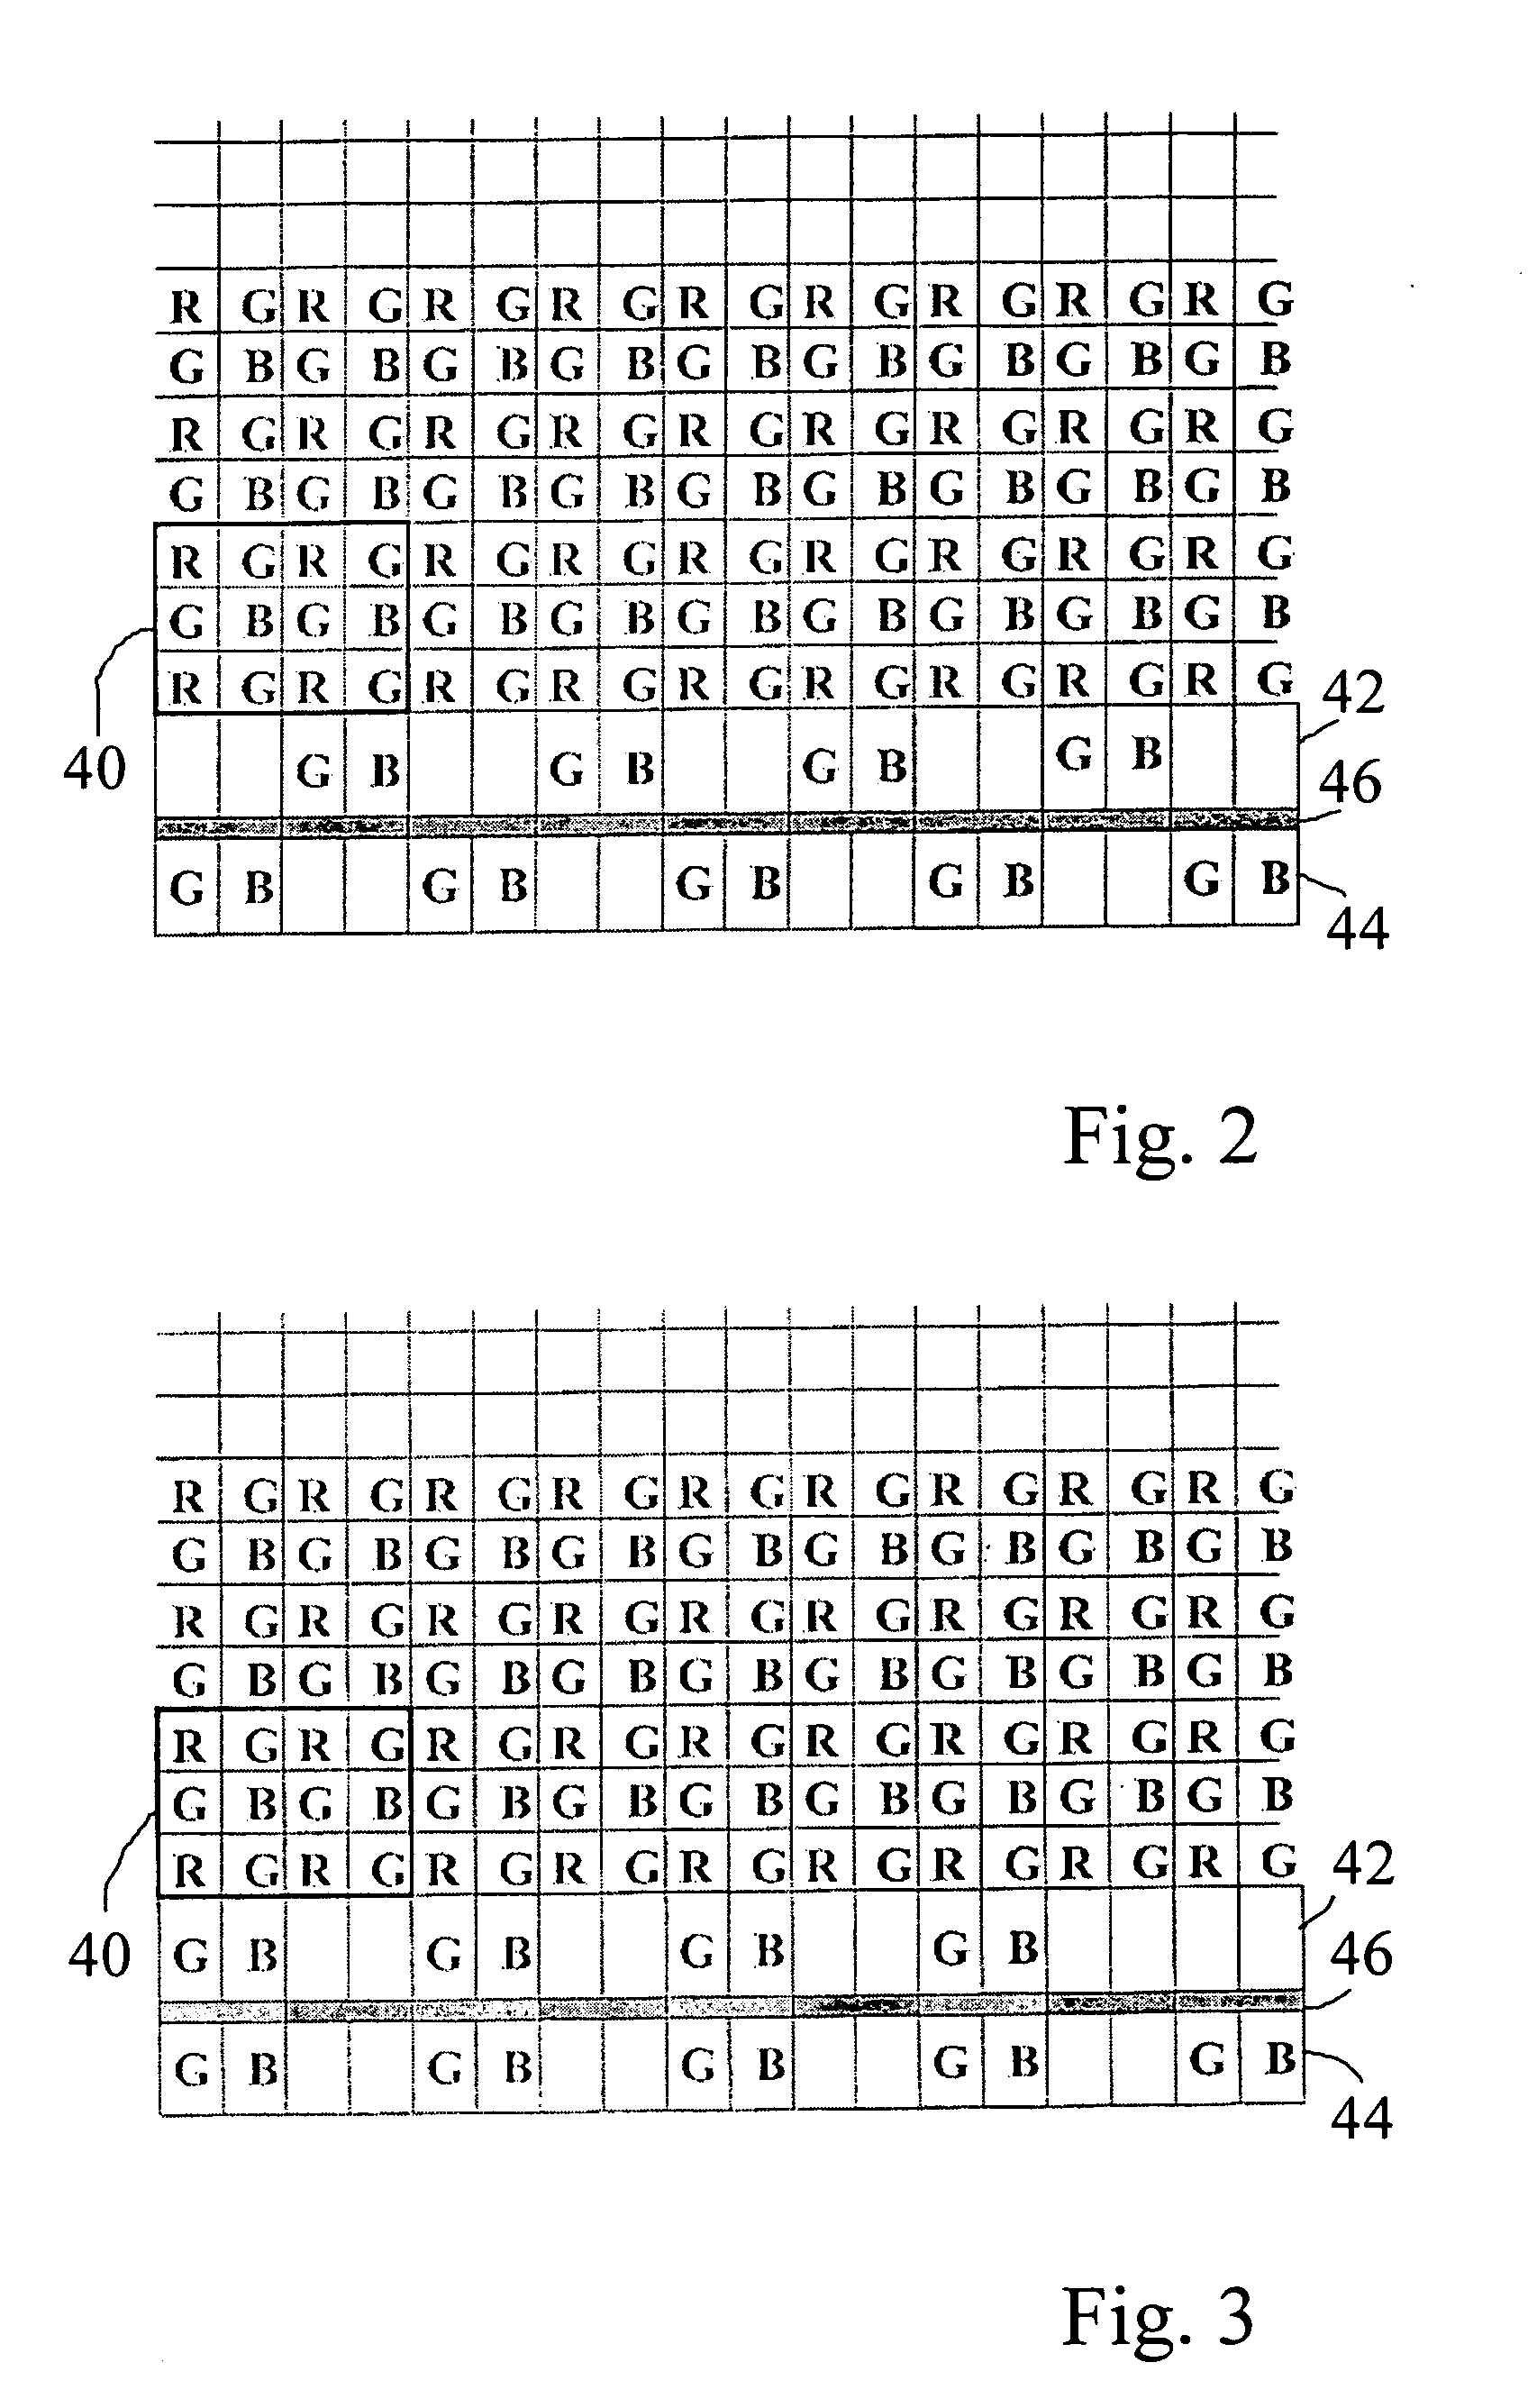 Method and apparatus for in a multi-pixel pick-up element reducing a pixel-based resolution and/or effecting anti-aliasing through selectively combining selective primary pixel outputs to combined secondary pixel outputs